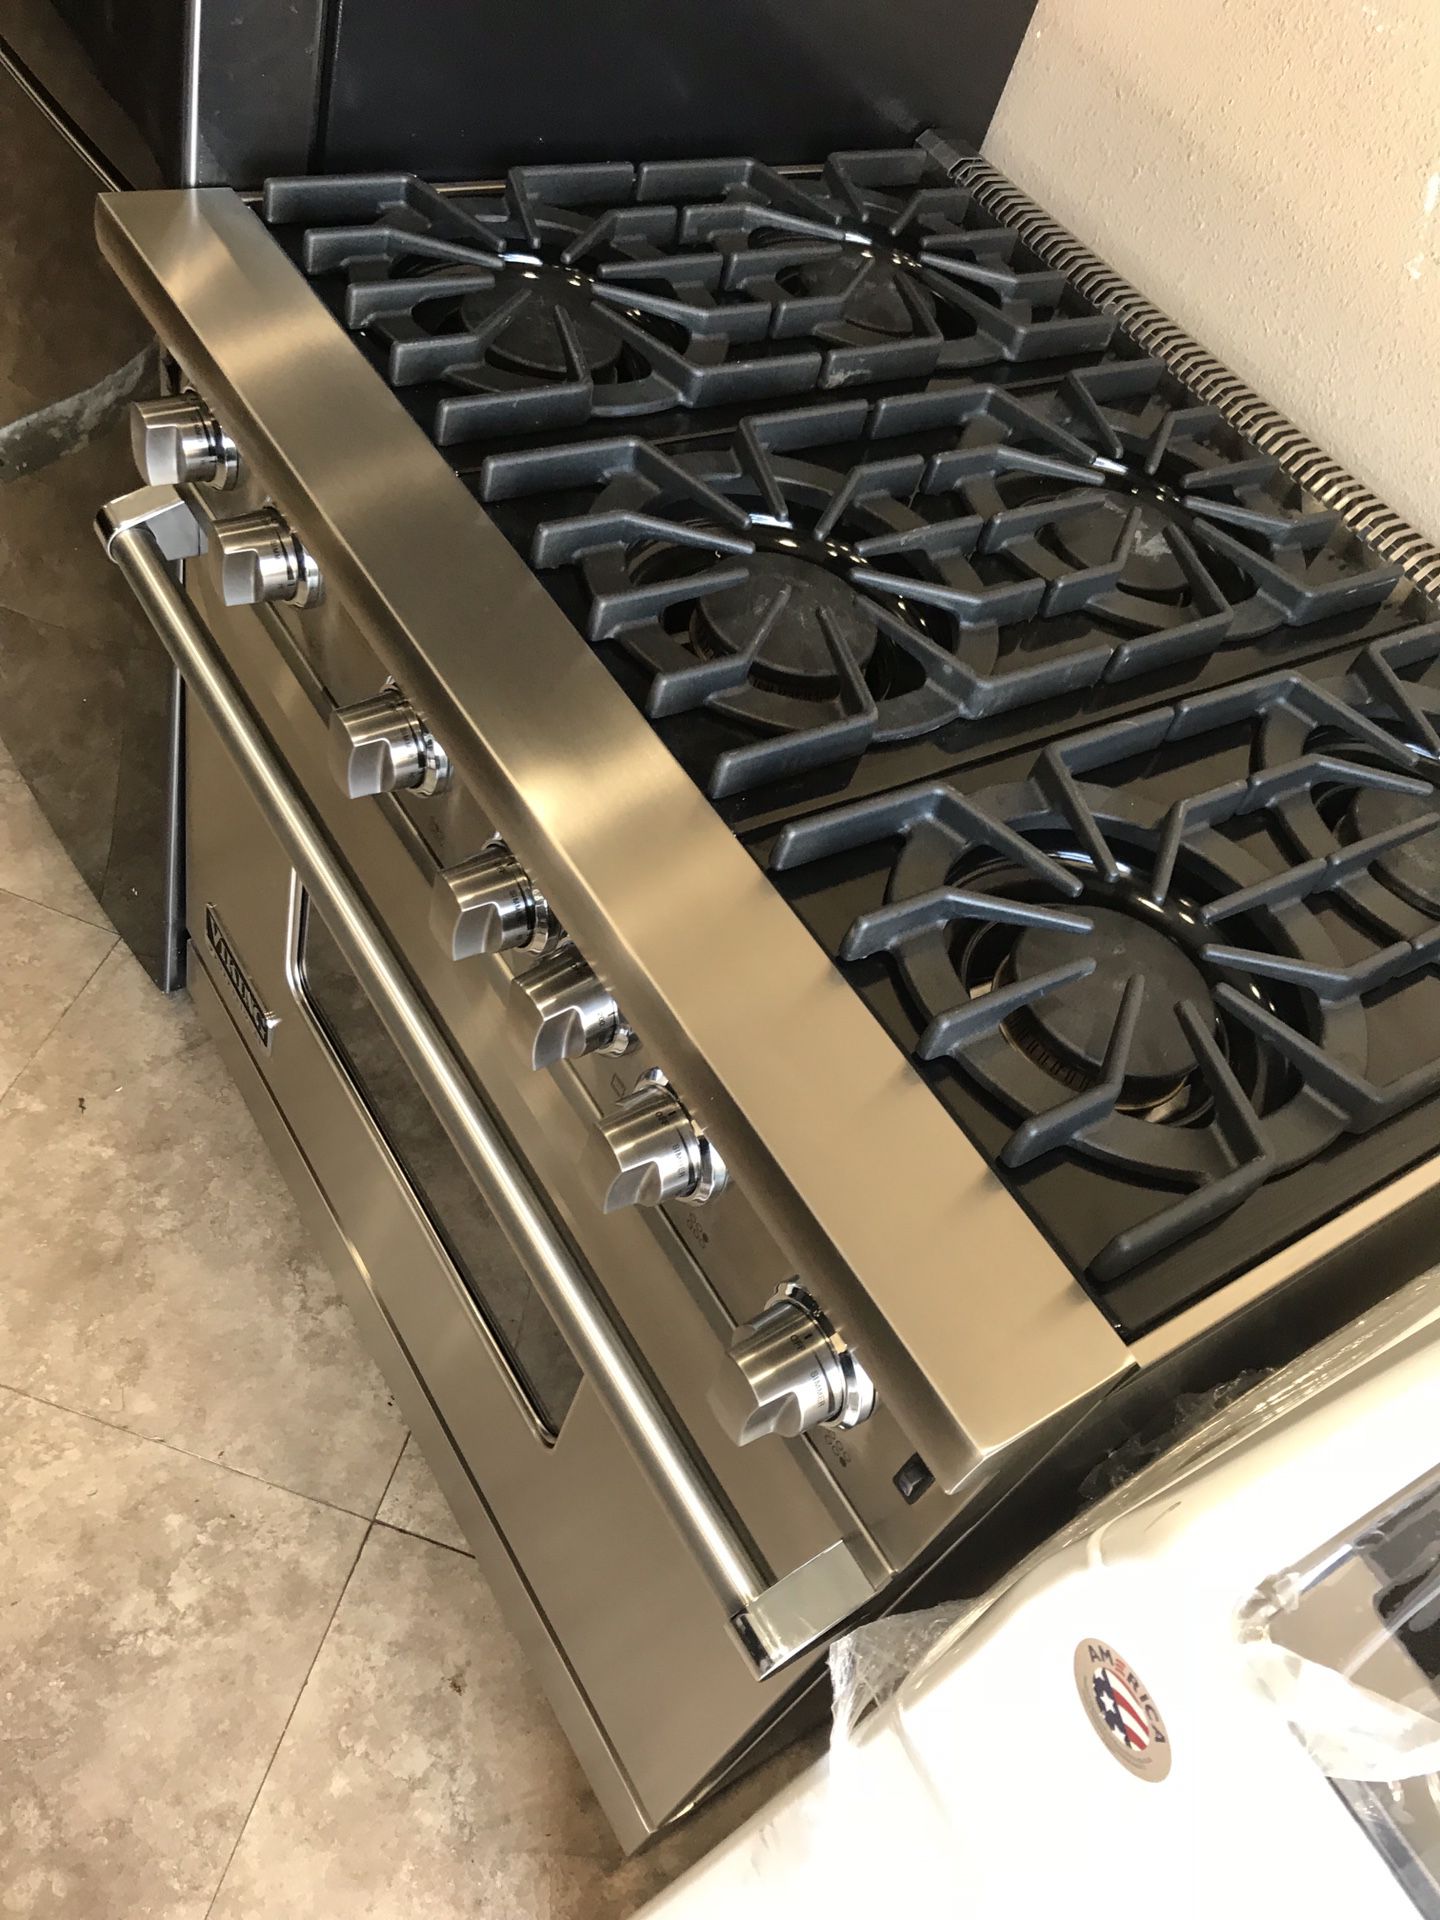 Viking Stove Gas Range for Sale in Paterson, NJ - OfferUp